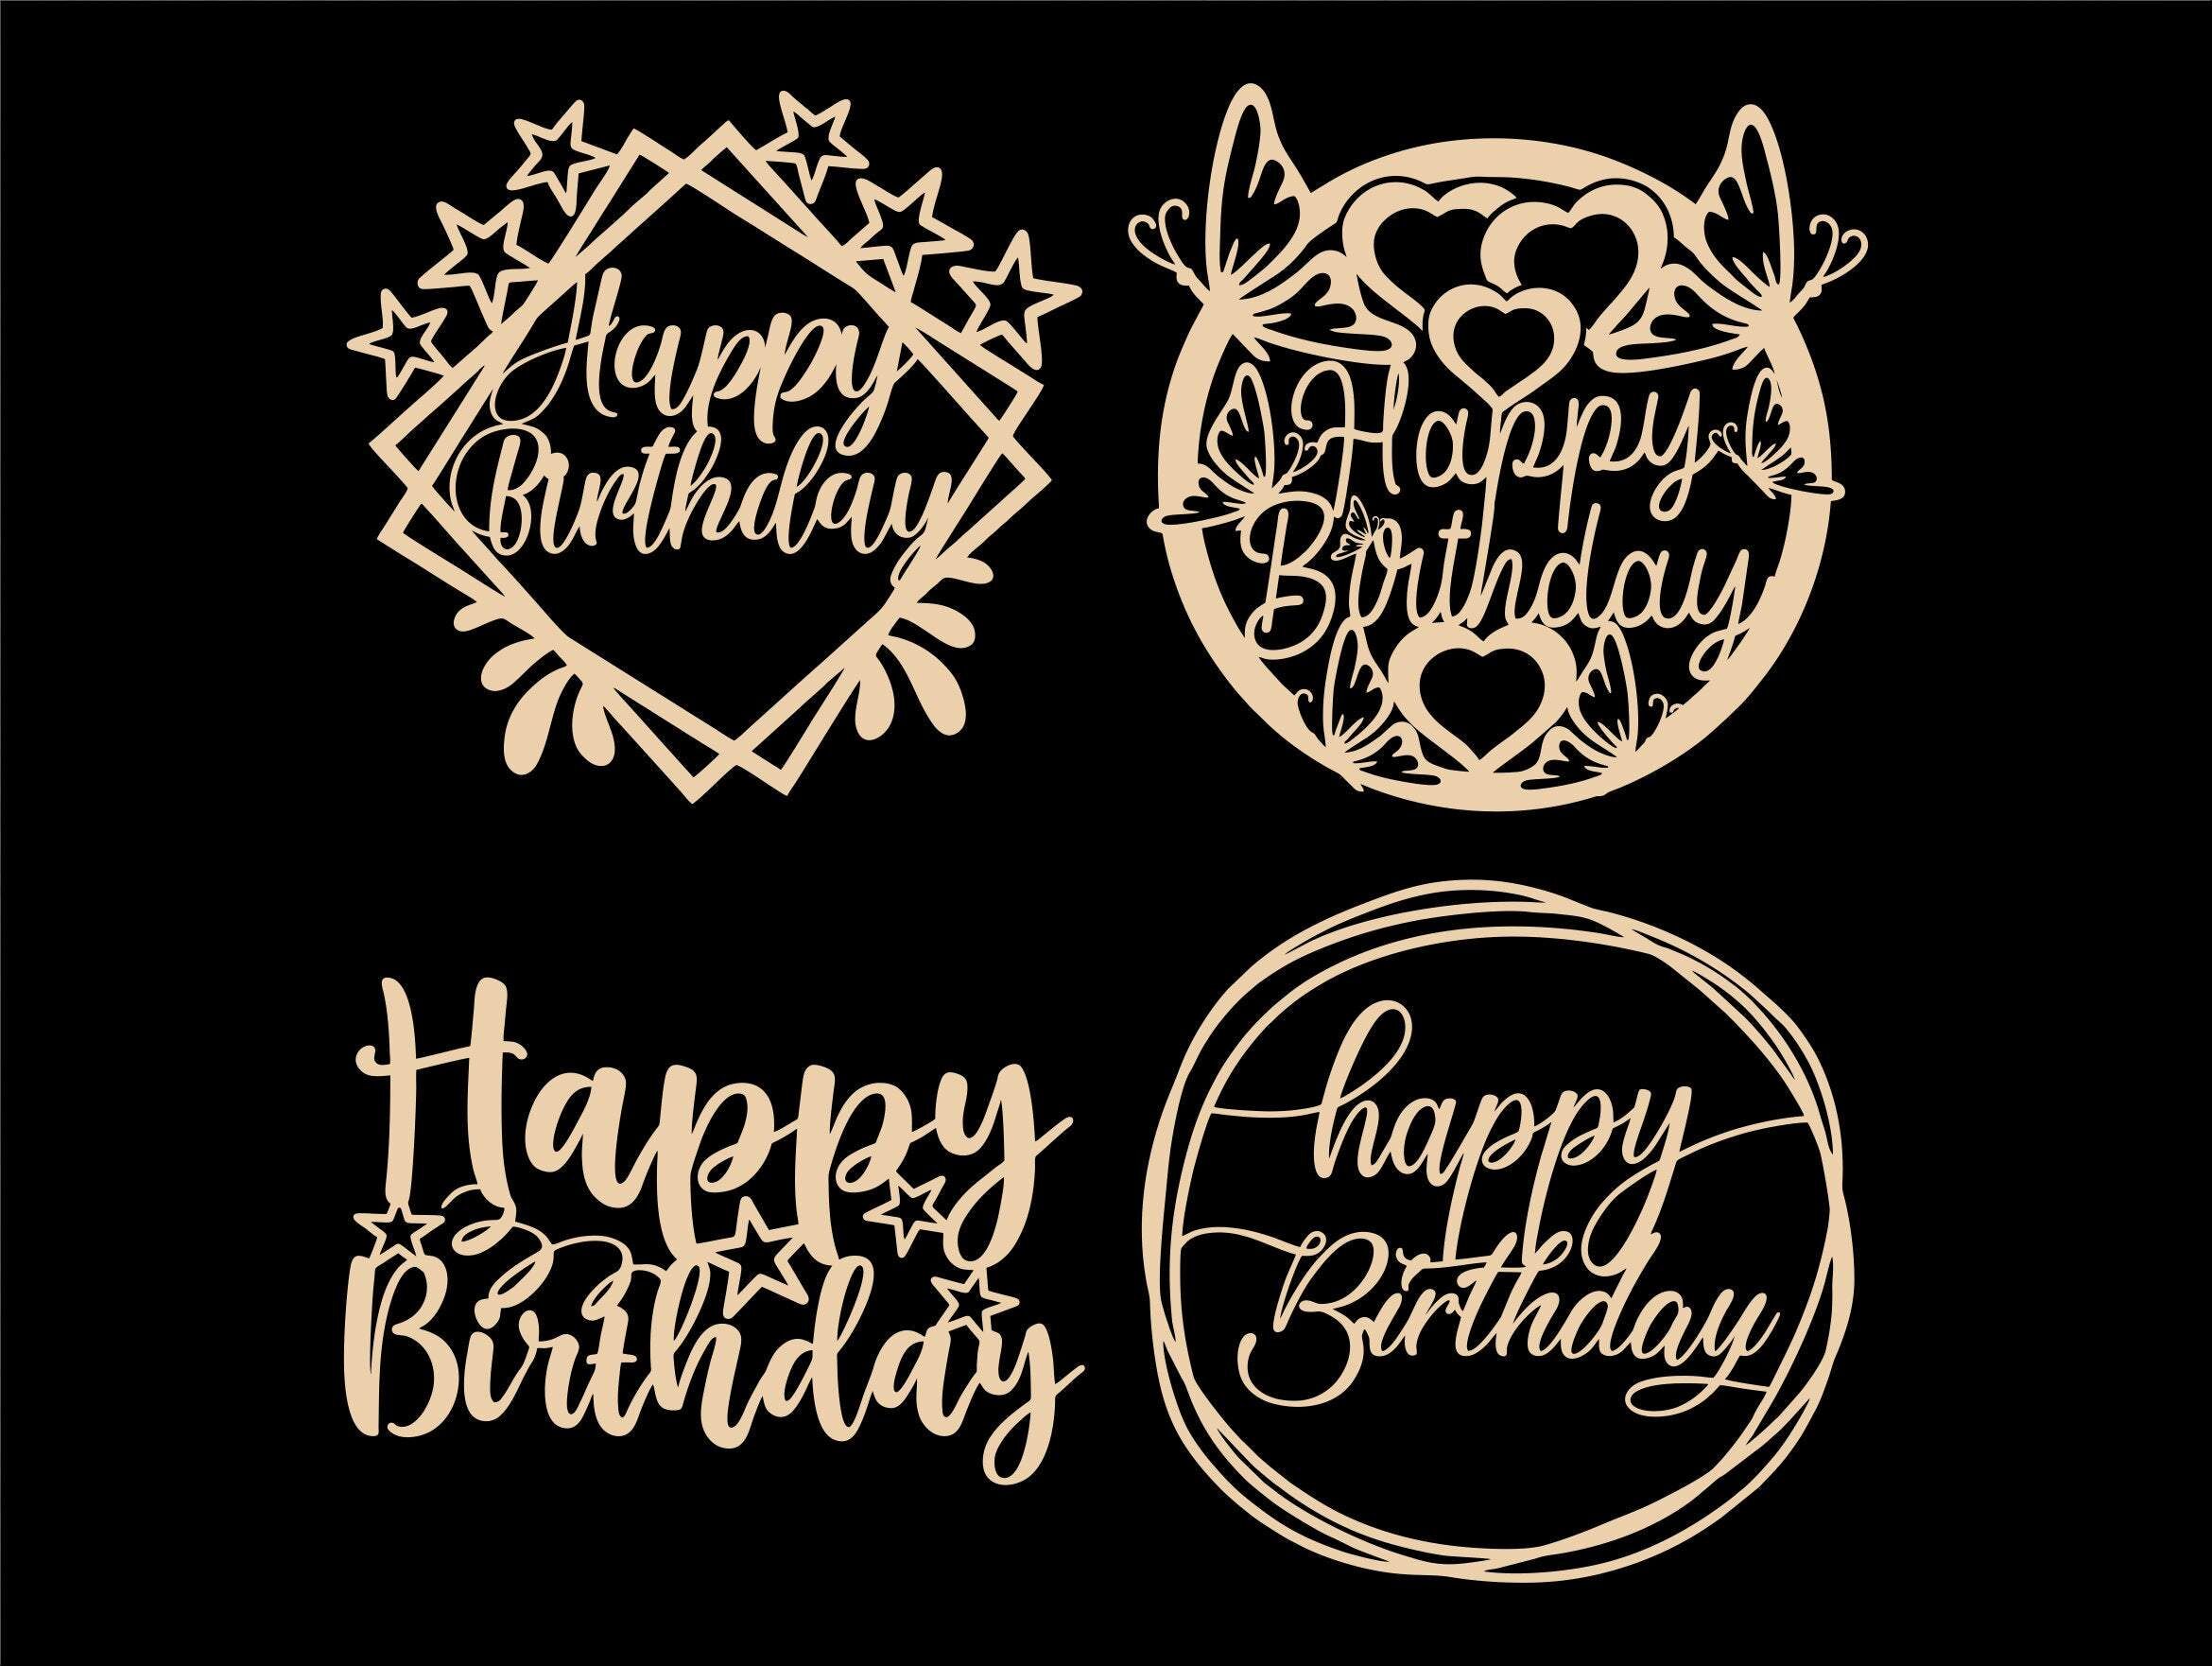 4,235 Cake Topper Happy Birthday Images, Stock Photos & Vectors |  Shutterstock